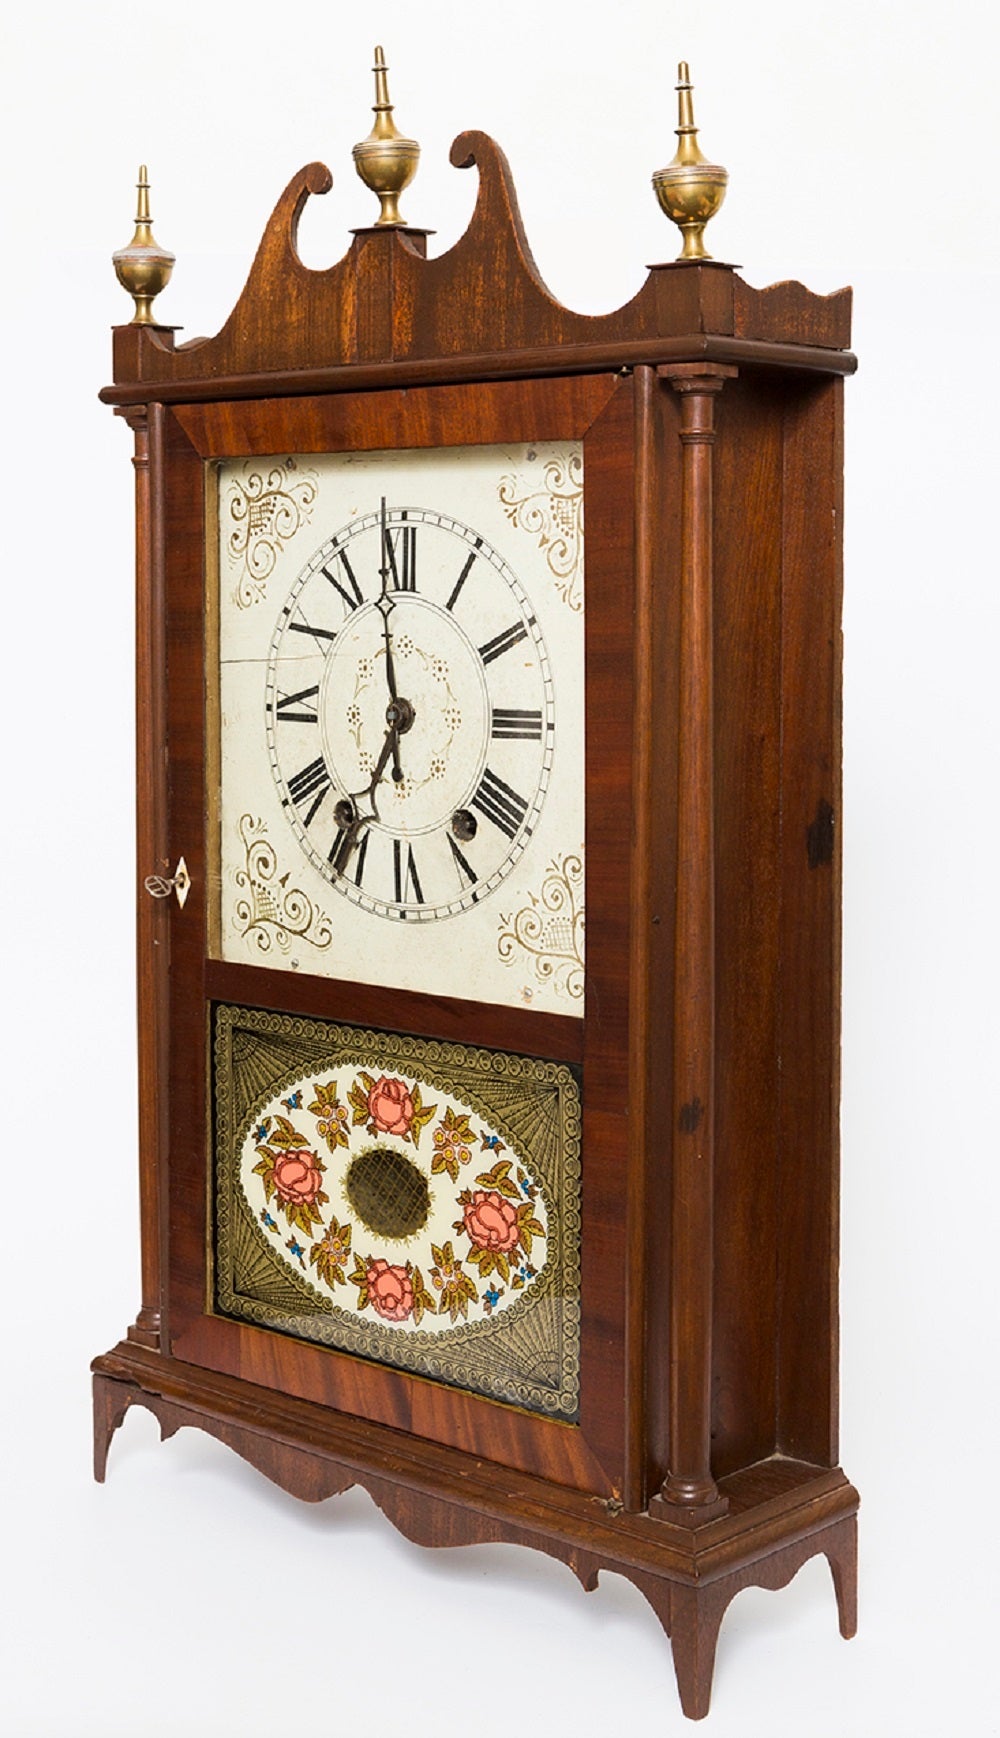 American mahogany pillar and scroll mantel clock by Eli Terry, circa 1820. American mahogany pillar and scroll mantel clock with carved scrolled pediment, brass finials, original works, all parts present, reverse painted glass of fine floral design